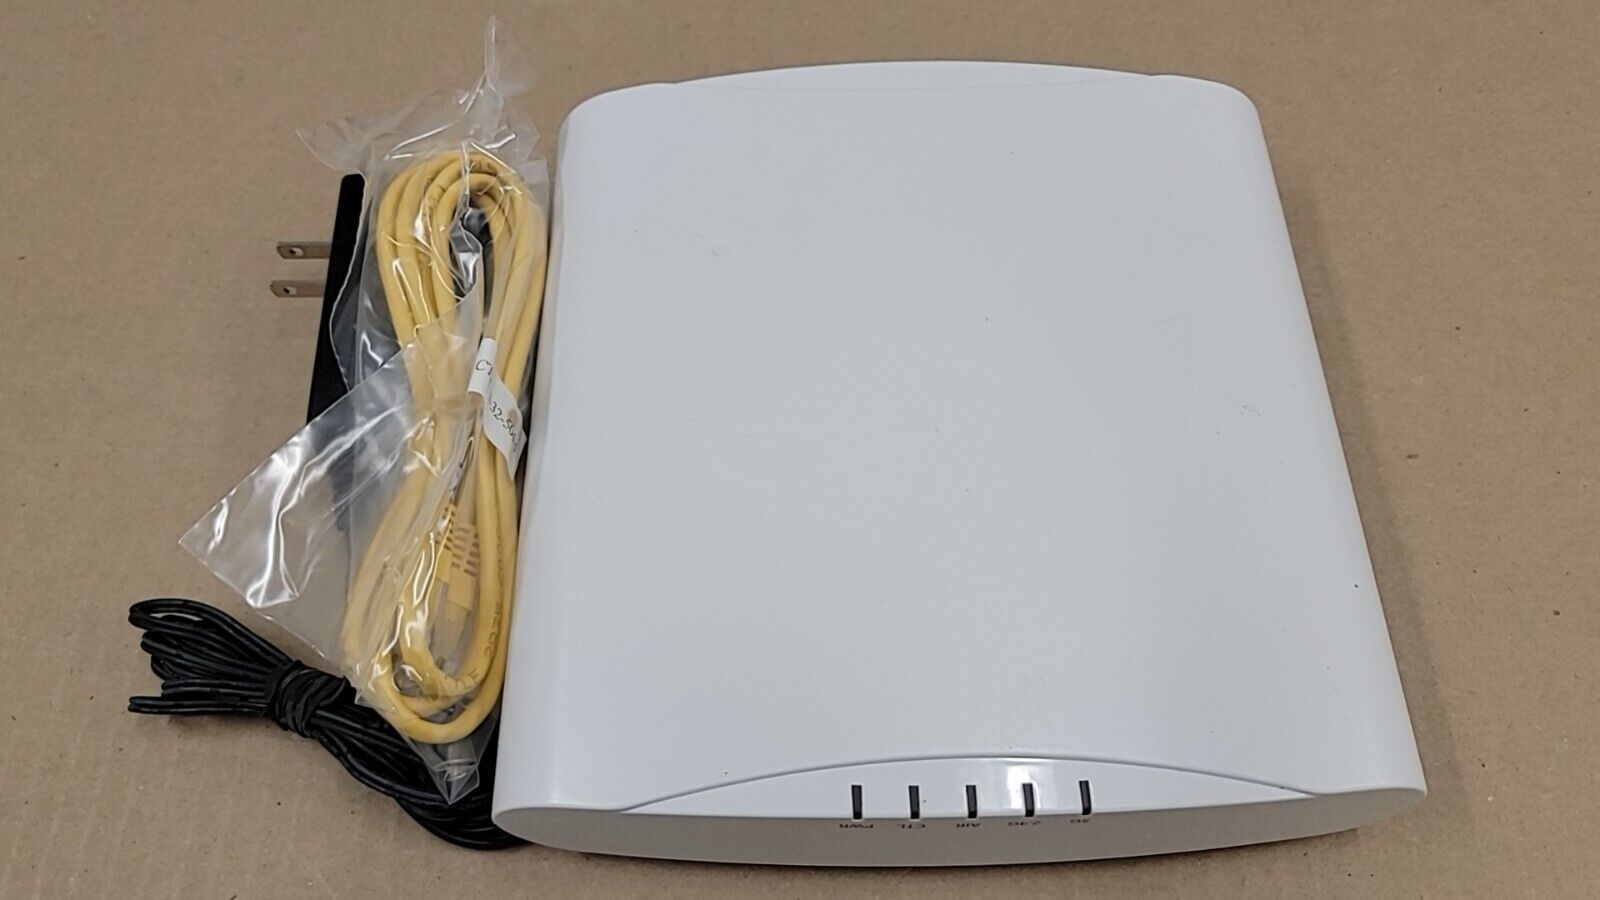 Dell EMC Ruckus R610 Wave 2 Wireless Access Point + Adapter